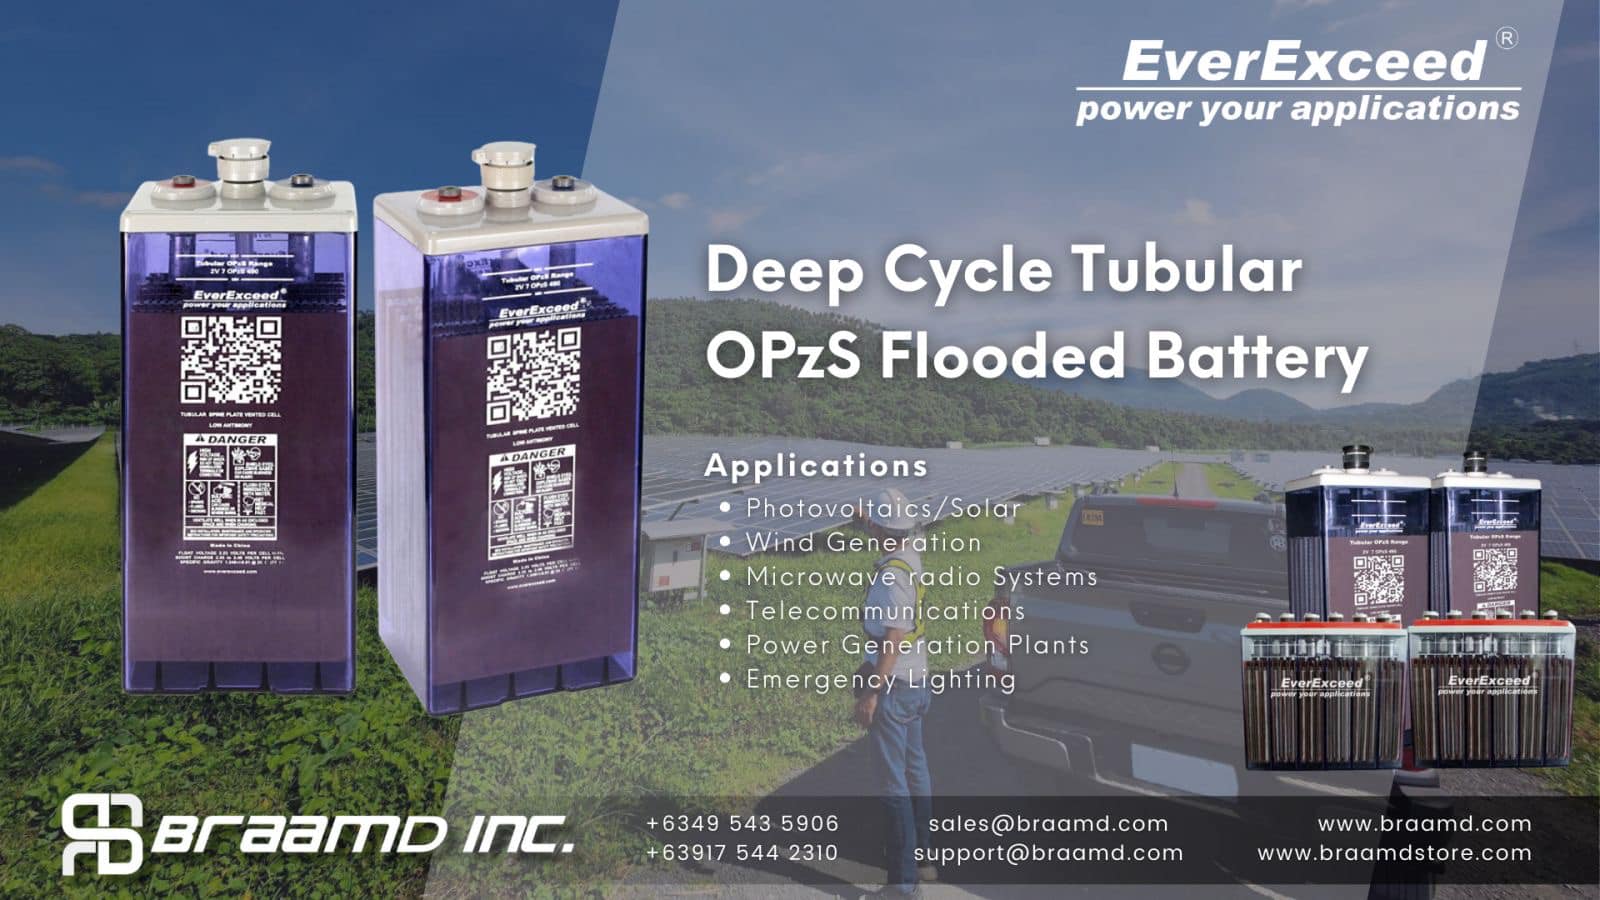 EverExceed Deep Cycle Tubular OPzS Flooded Batteries